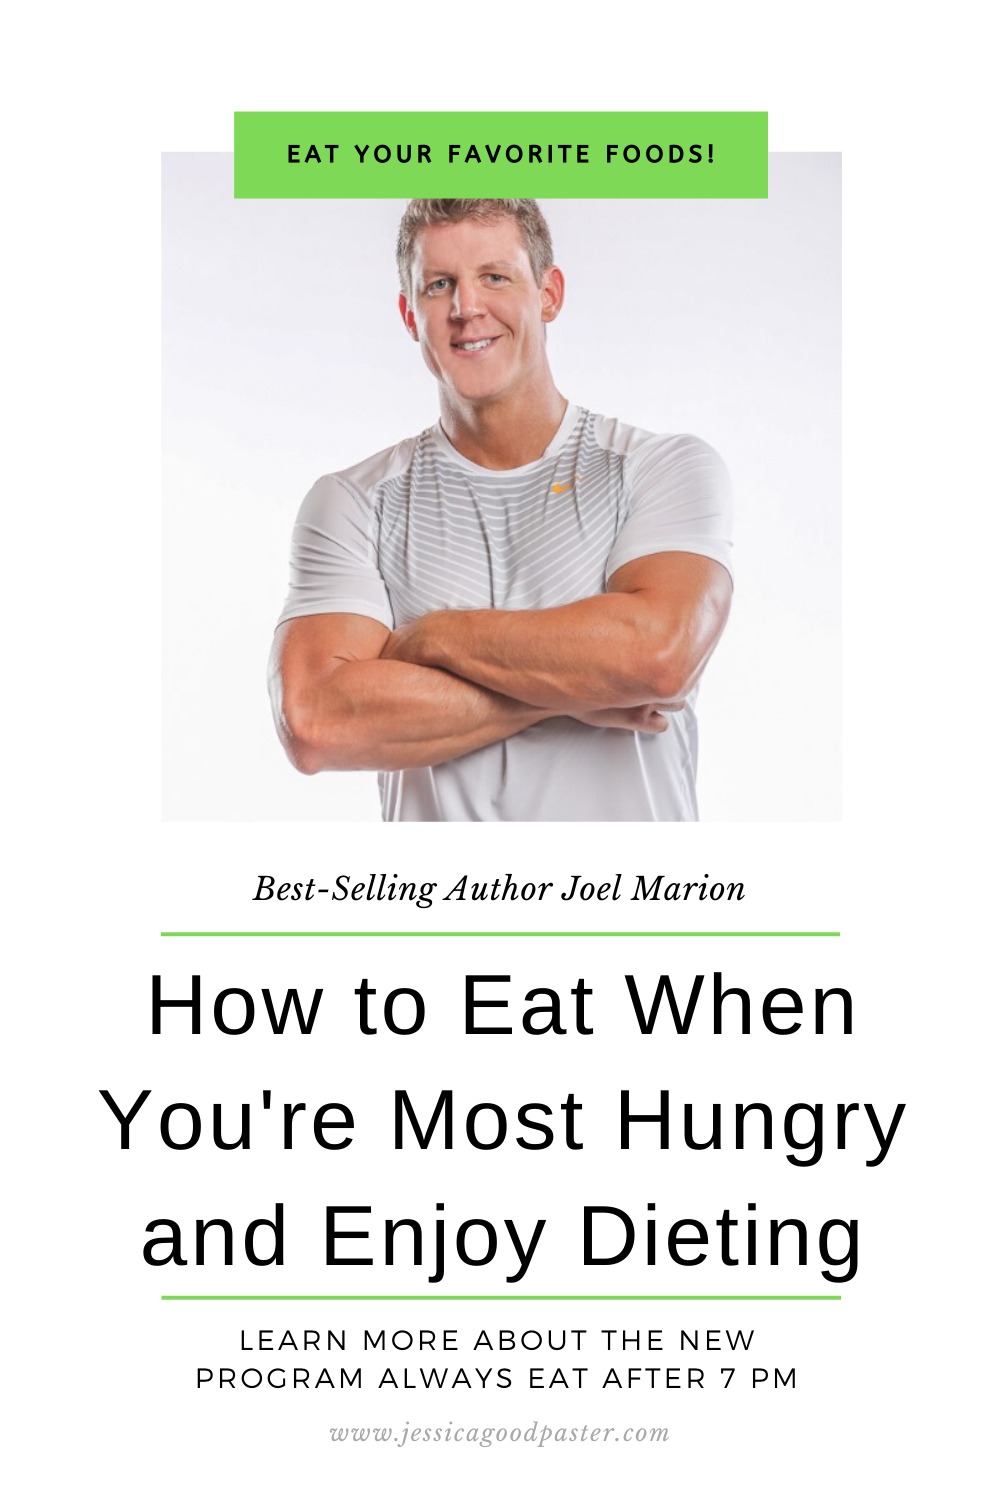 How to Eat When You're Most Hungry and Enjoy Dieting | Are you always hungry and miserable when you try to lose weight? It doesn't have to be that way! Check out Joel Marion's new book Always Eat After 7 PM to learn how. #diet #diettips #AlwaysEatBook #eathealthy